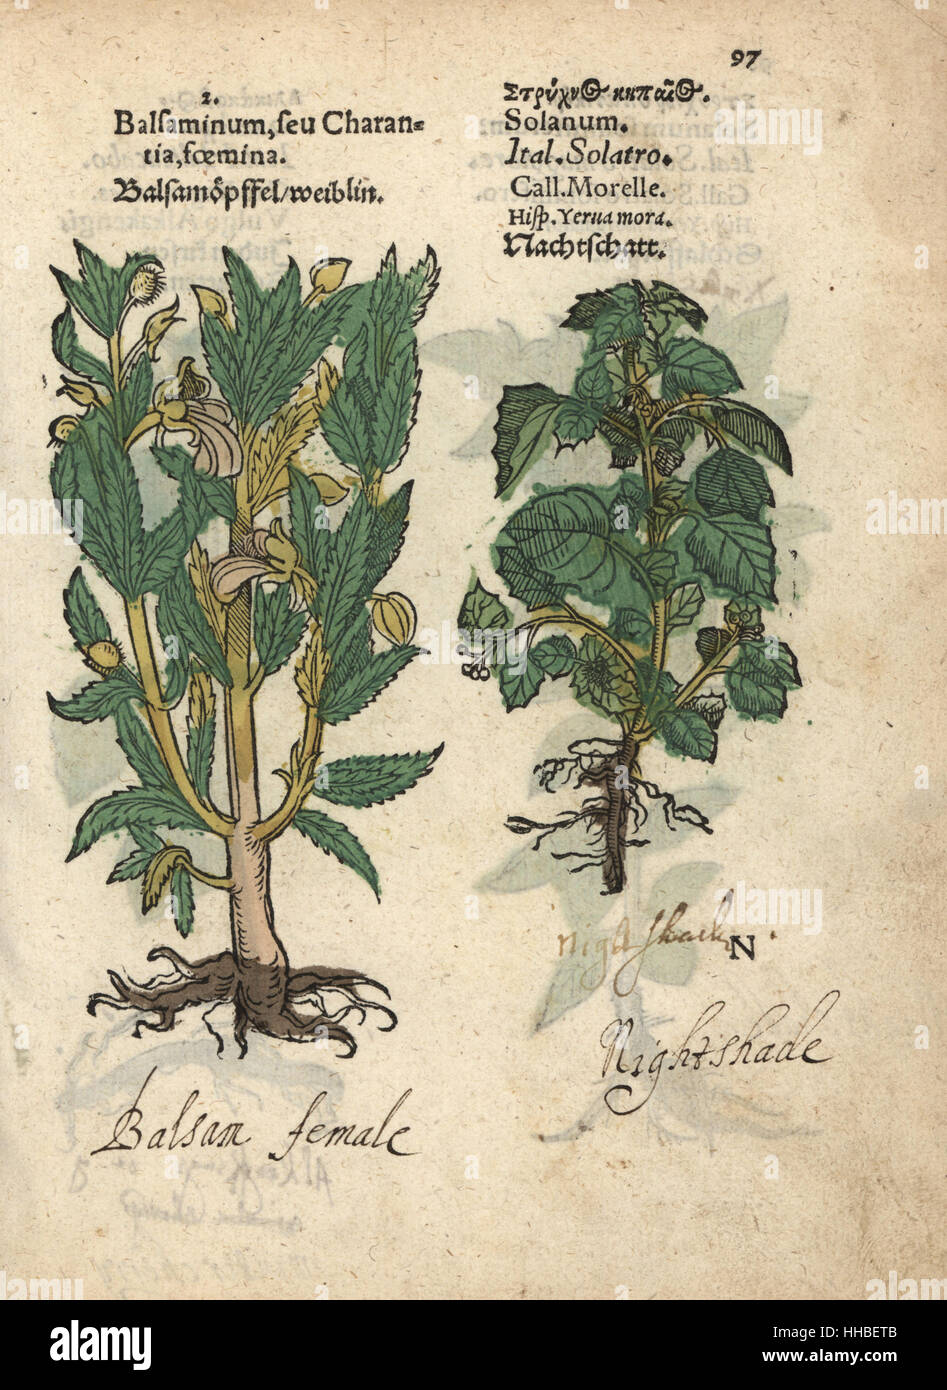 Balsam apple female, Momordica balsamina, and deadly nightshade, Atropa belladonna. Handcoloured woodblock engraving of a botanical illustration from Adam Lonicer's Krauterbuch, or Herbal, Frankfurt, 1557. This from a 17th century pirate edition or atlas of illustrations only, with captions in Latin, Greek, French, Italian, German, and in English manuscript. Stock Photo